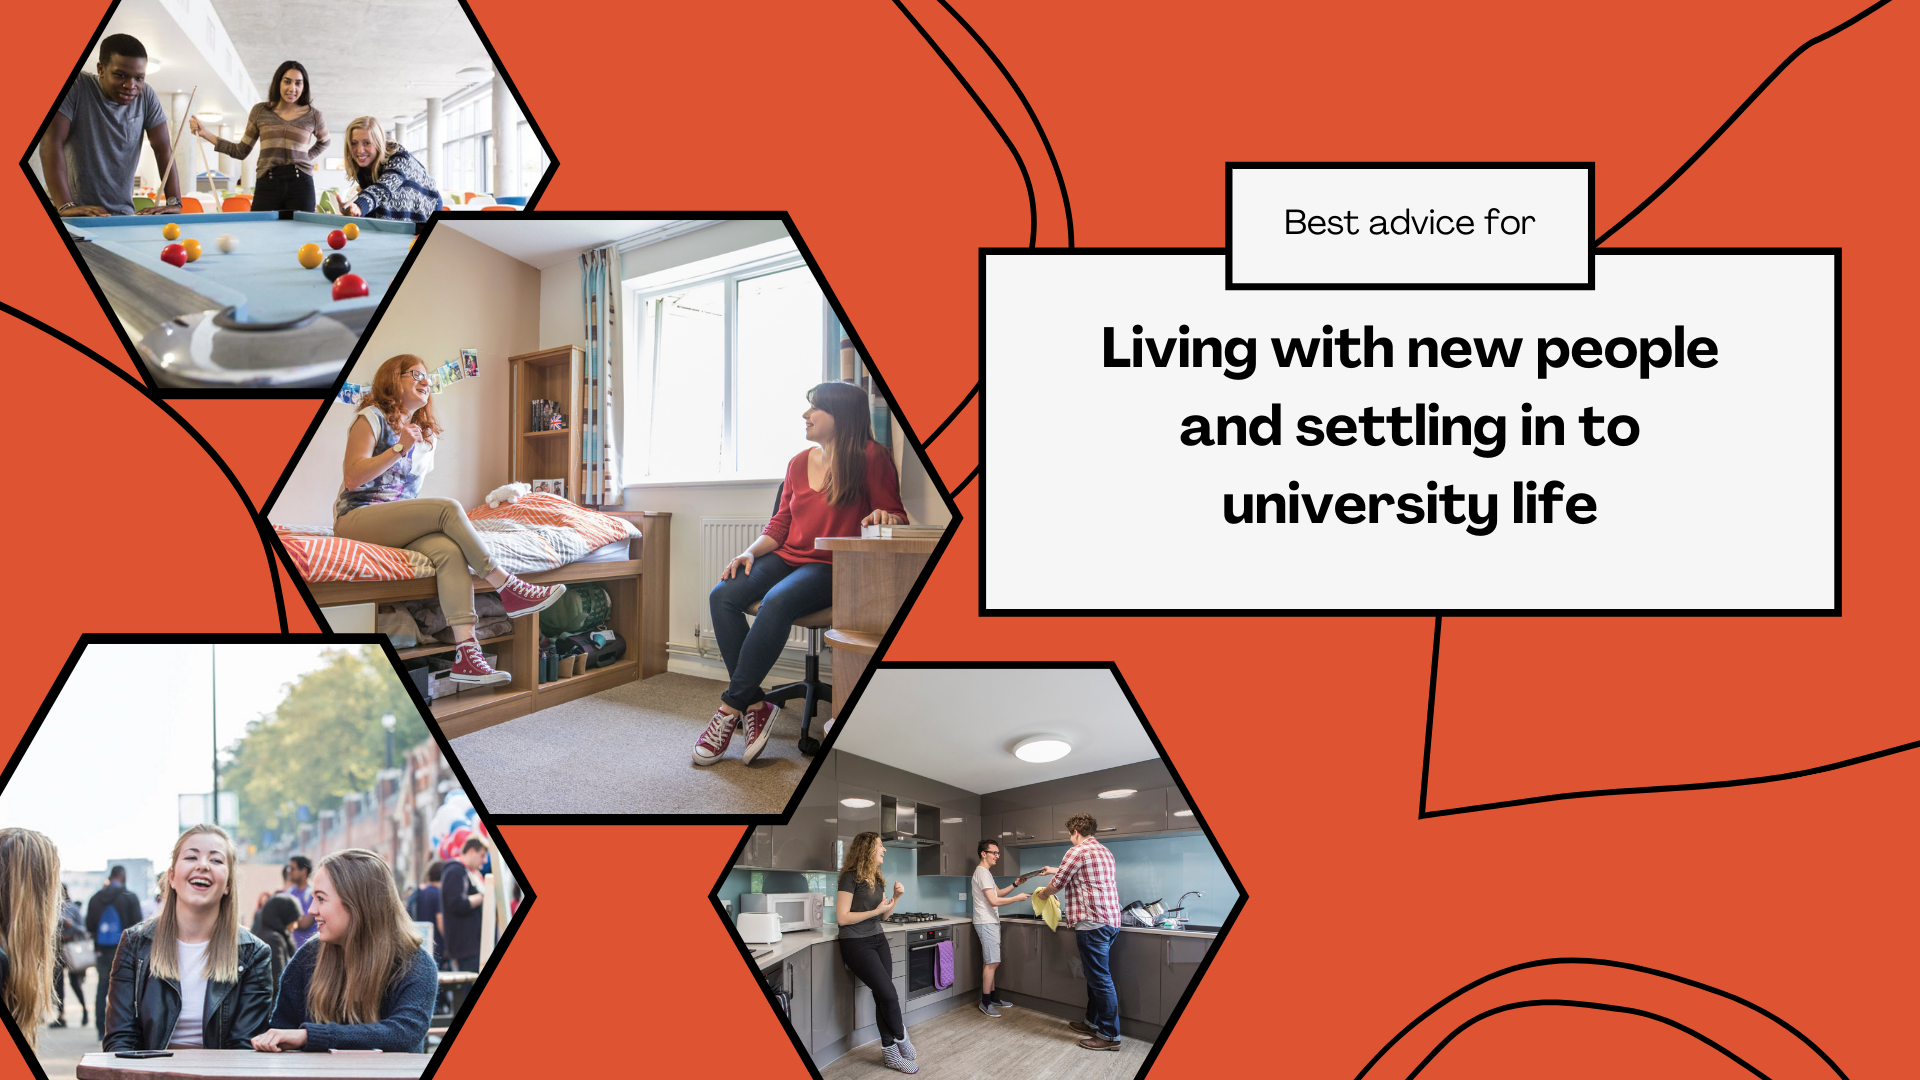 Living with new people and settling in to university life